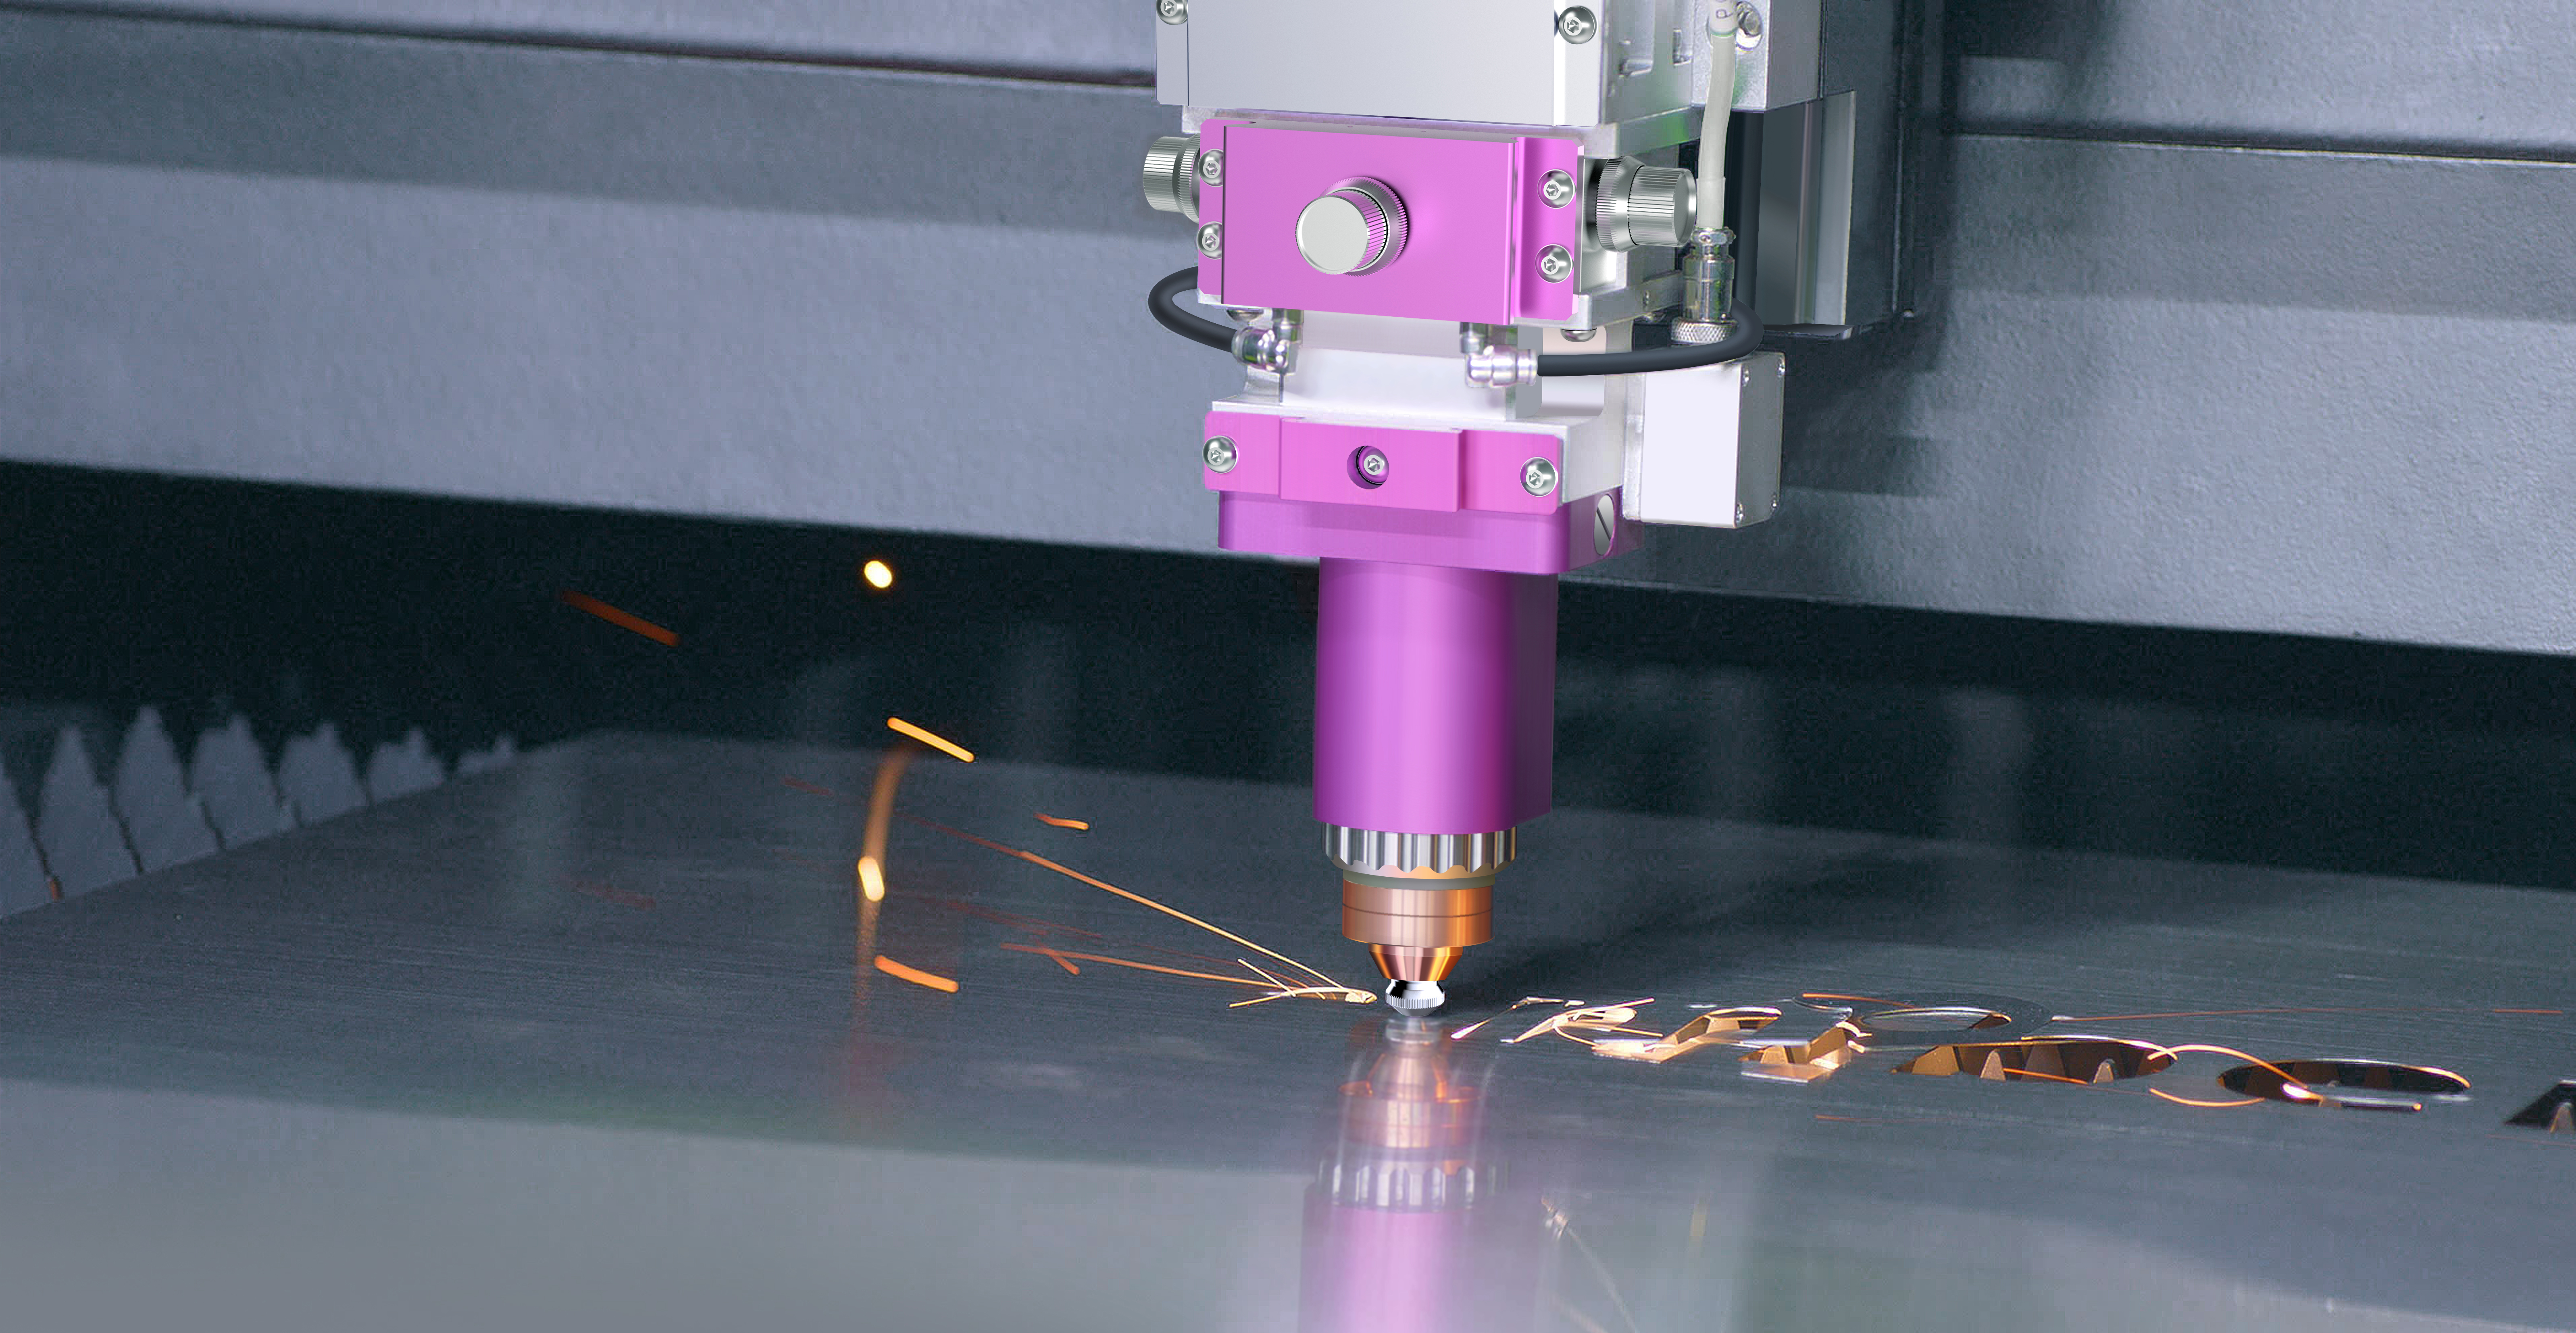 What are the advantages of fiber laser cutting machine in cutting applications